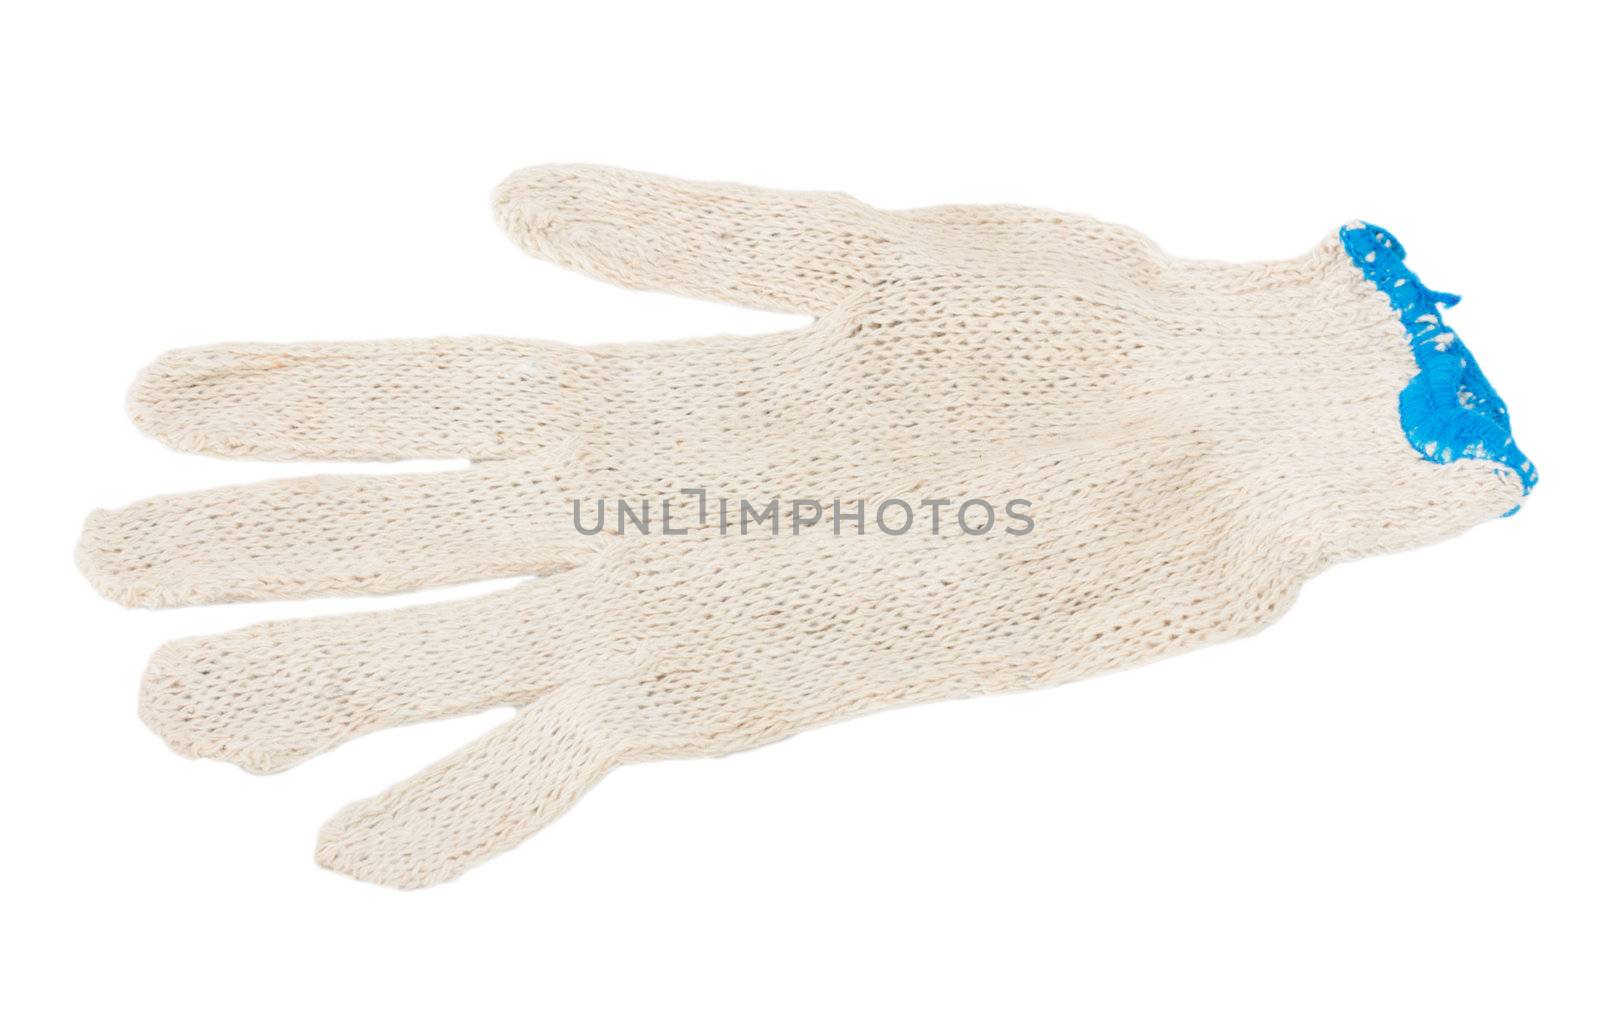 White knitted glove isolated on white background 